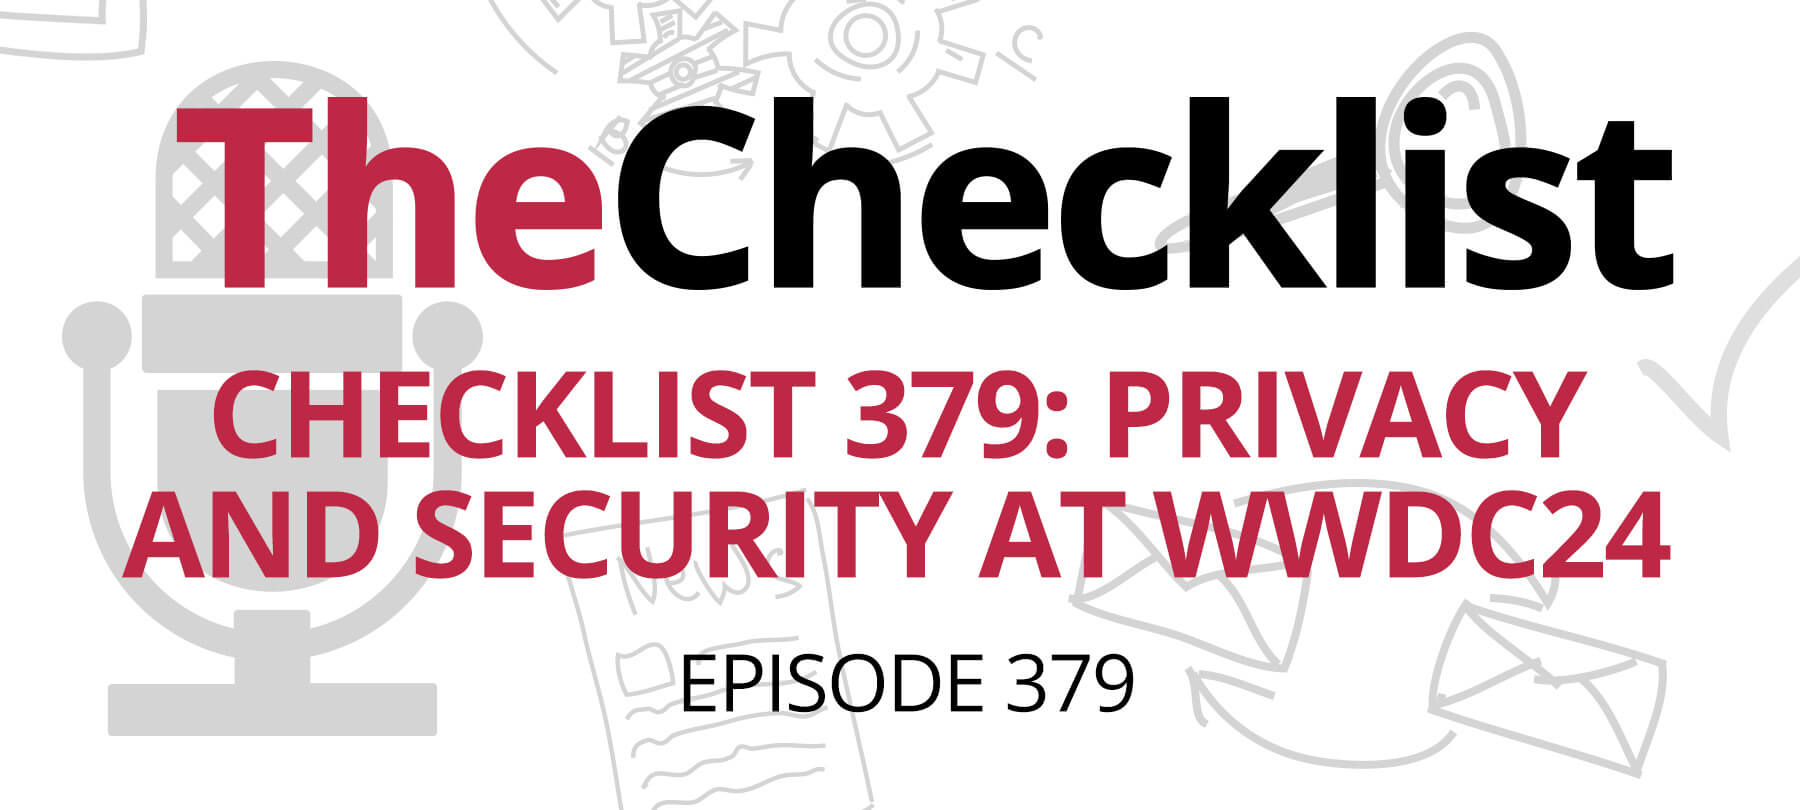 Checklist 379: Privacy and Security at WWDC24 header image. red text on white background